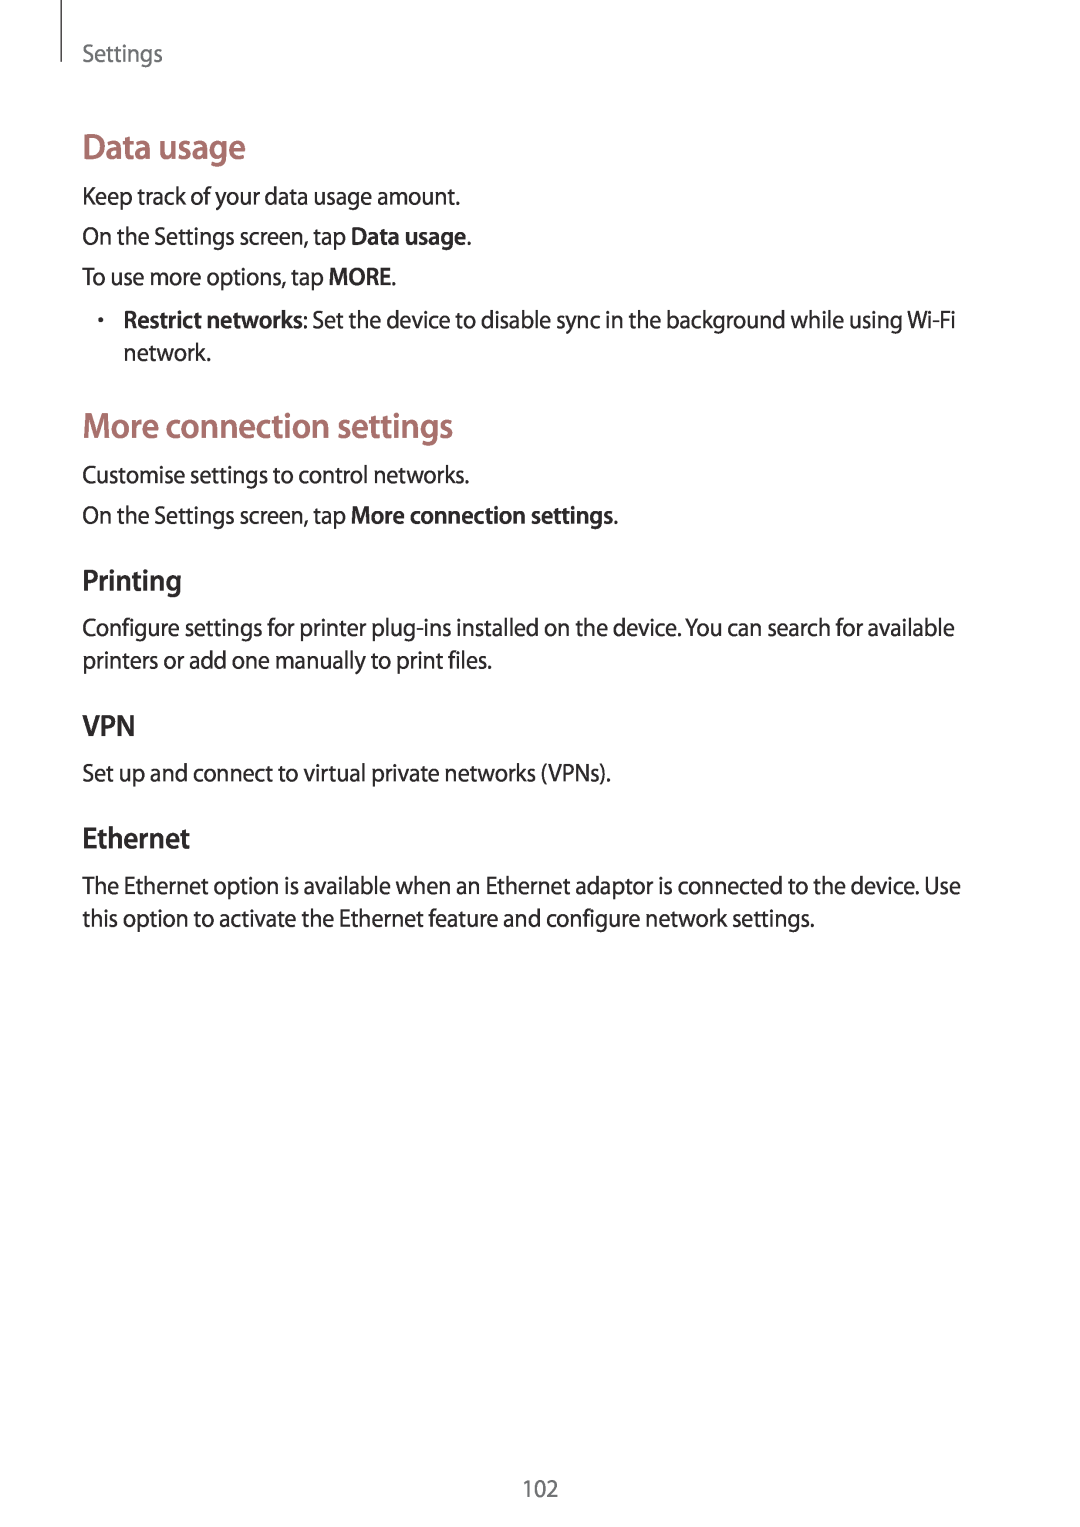 Samsung SM-P550NZWANEE, SM-P550NZKALUX, SM-P550NZWACHN Data usage, More connection settings, Printing, Ethernet, Settings 